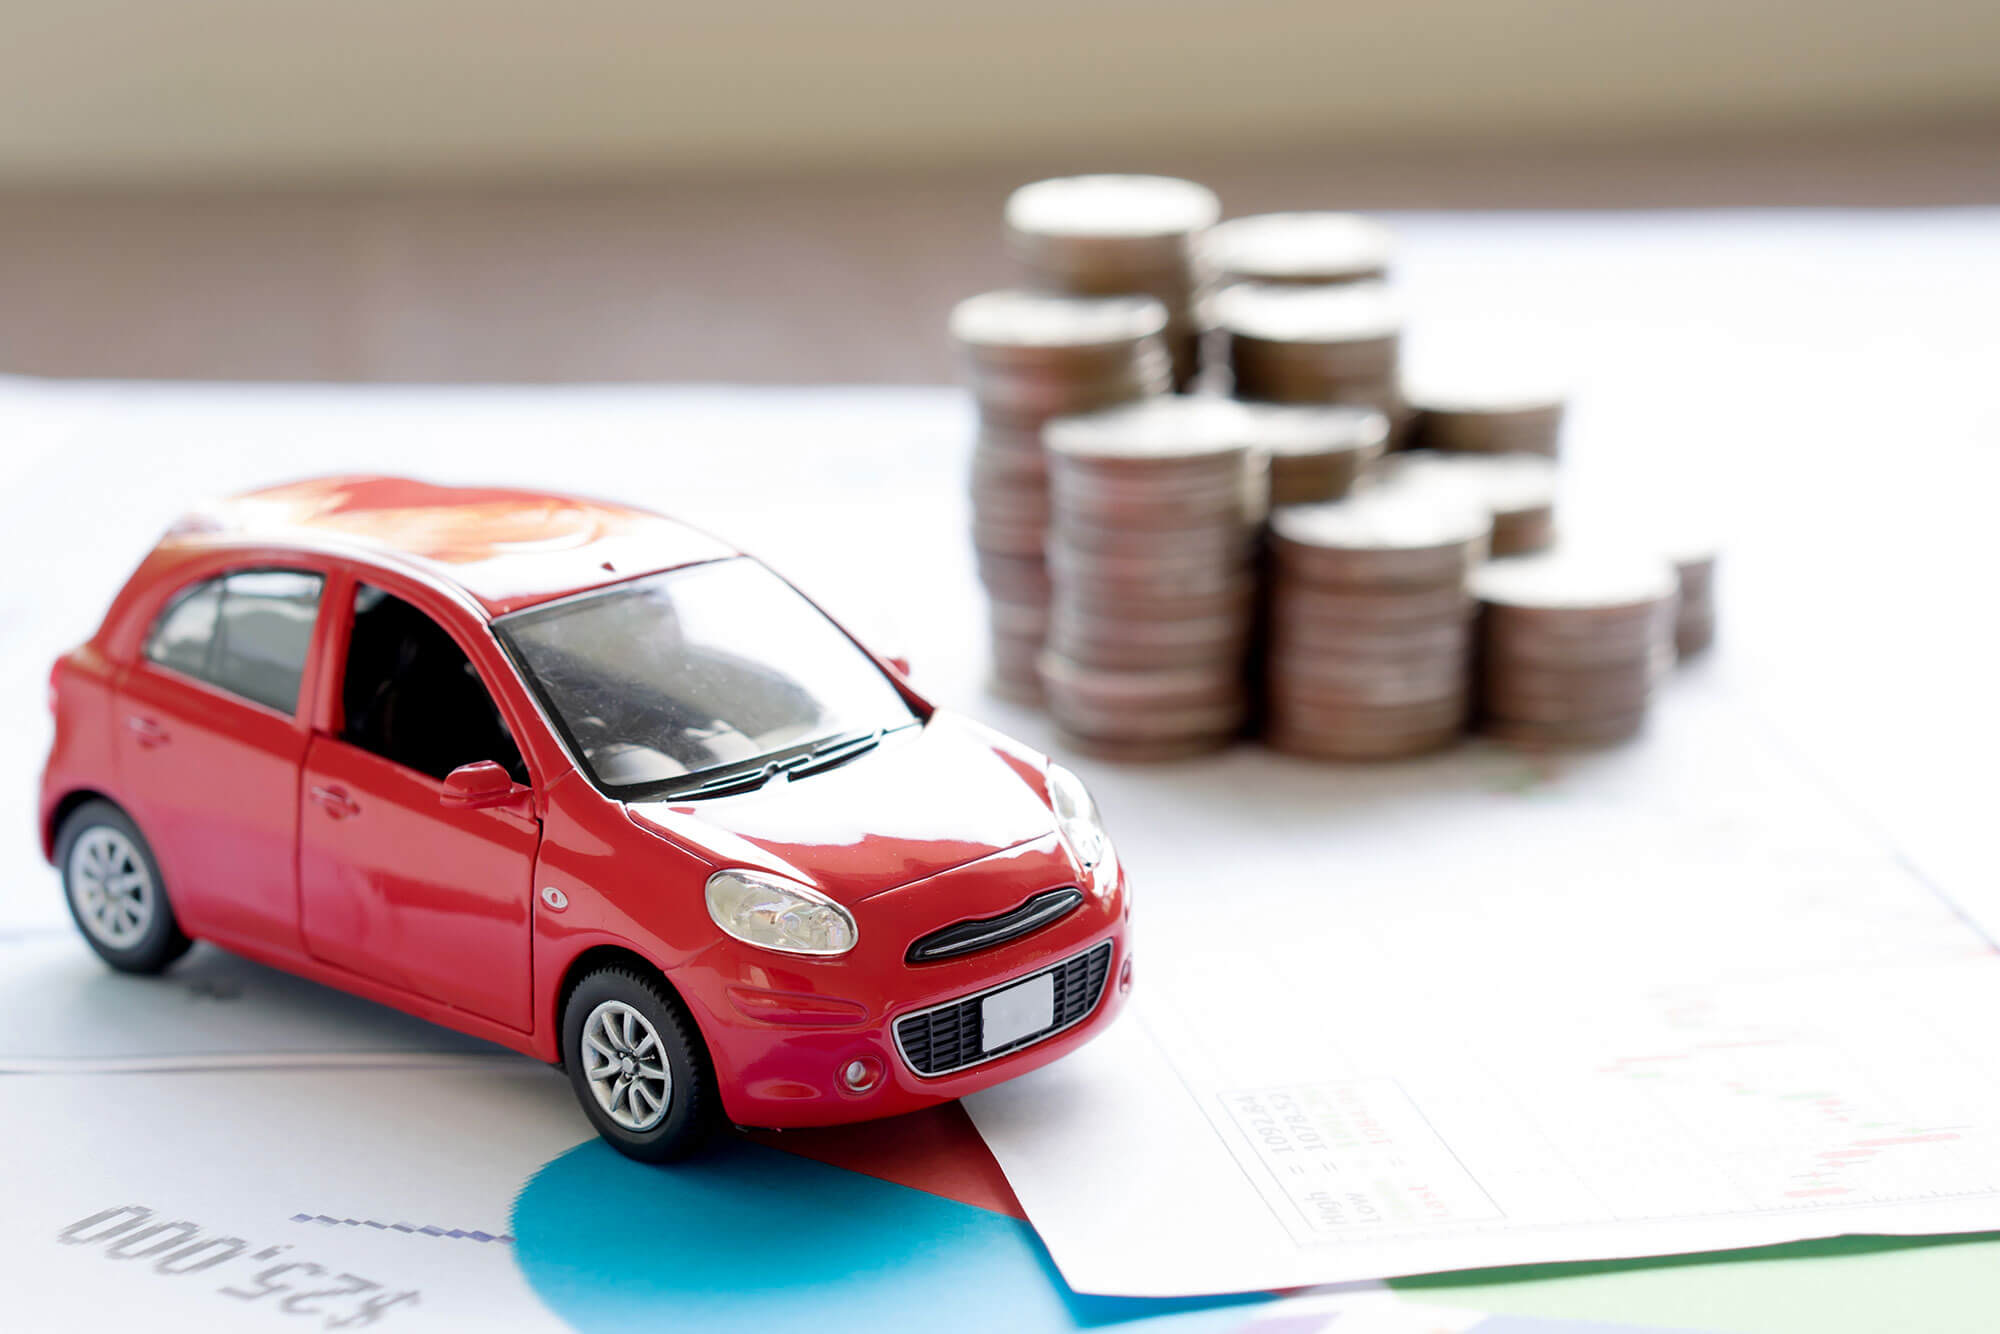 Explore the top 10 car loan options available in Delhi. Compare rates, terms, and benefits to find the perfect financing solution for your dream car.